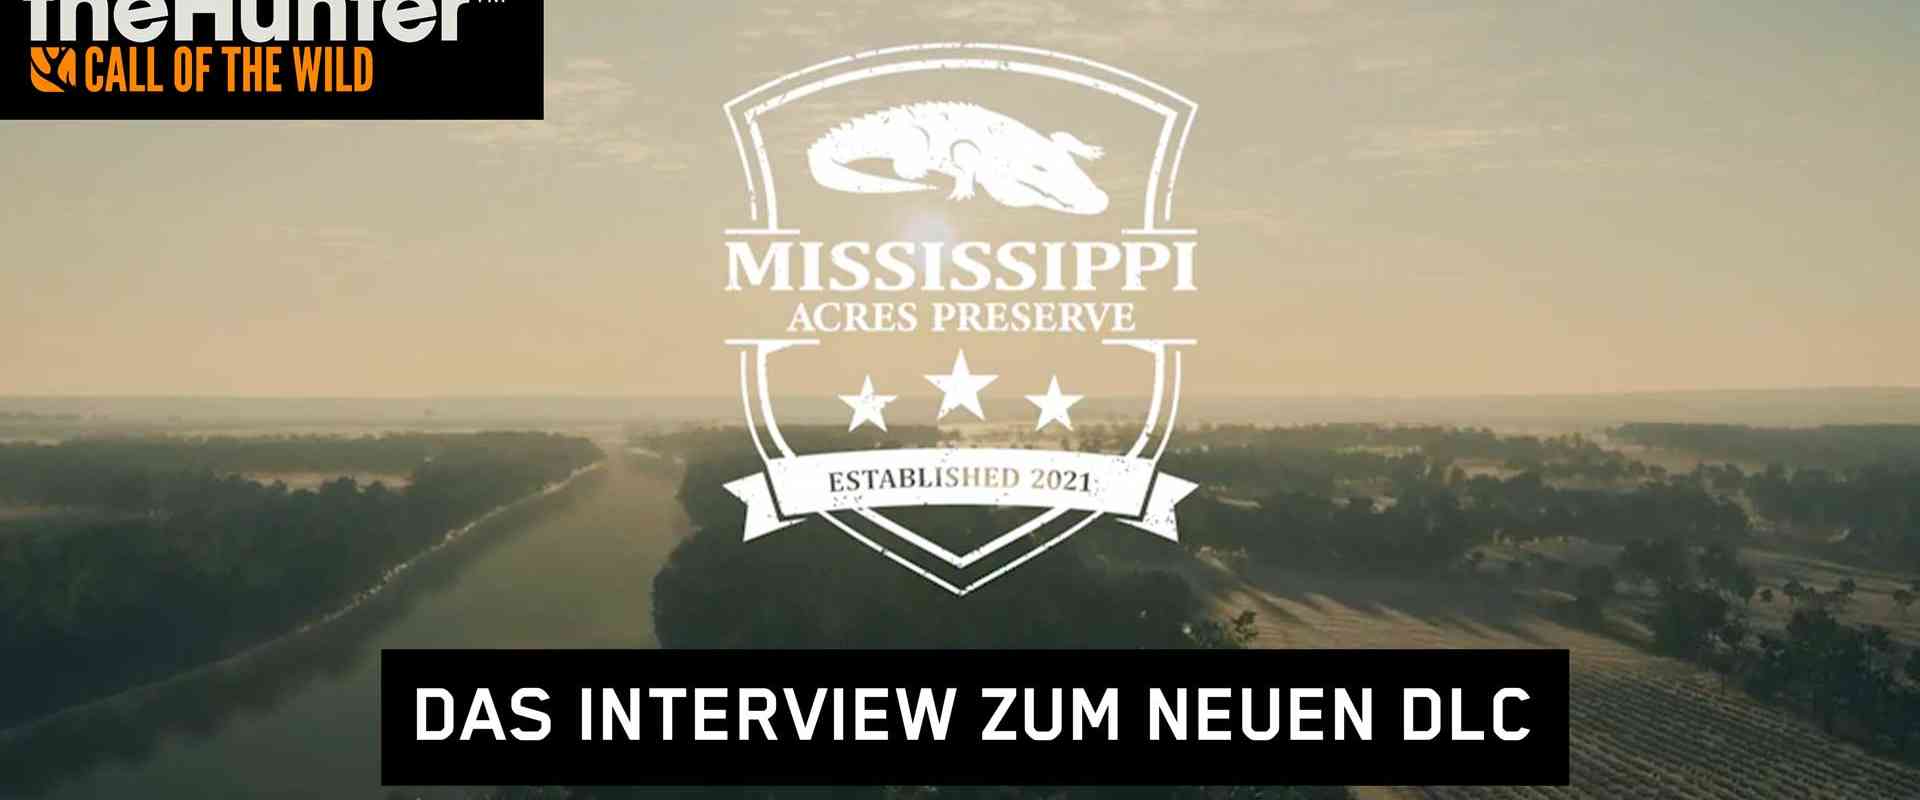 thehunter cotw mississippi interview